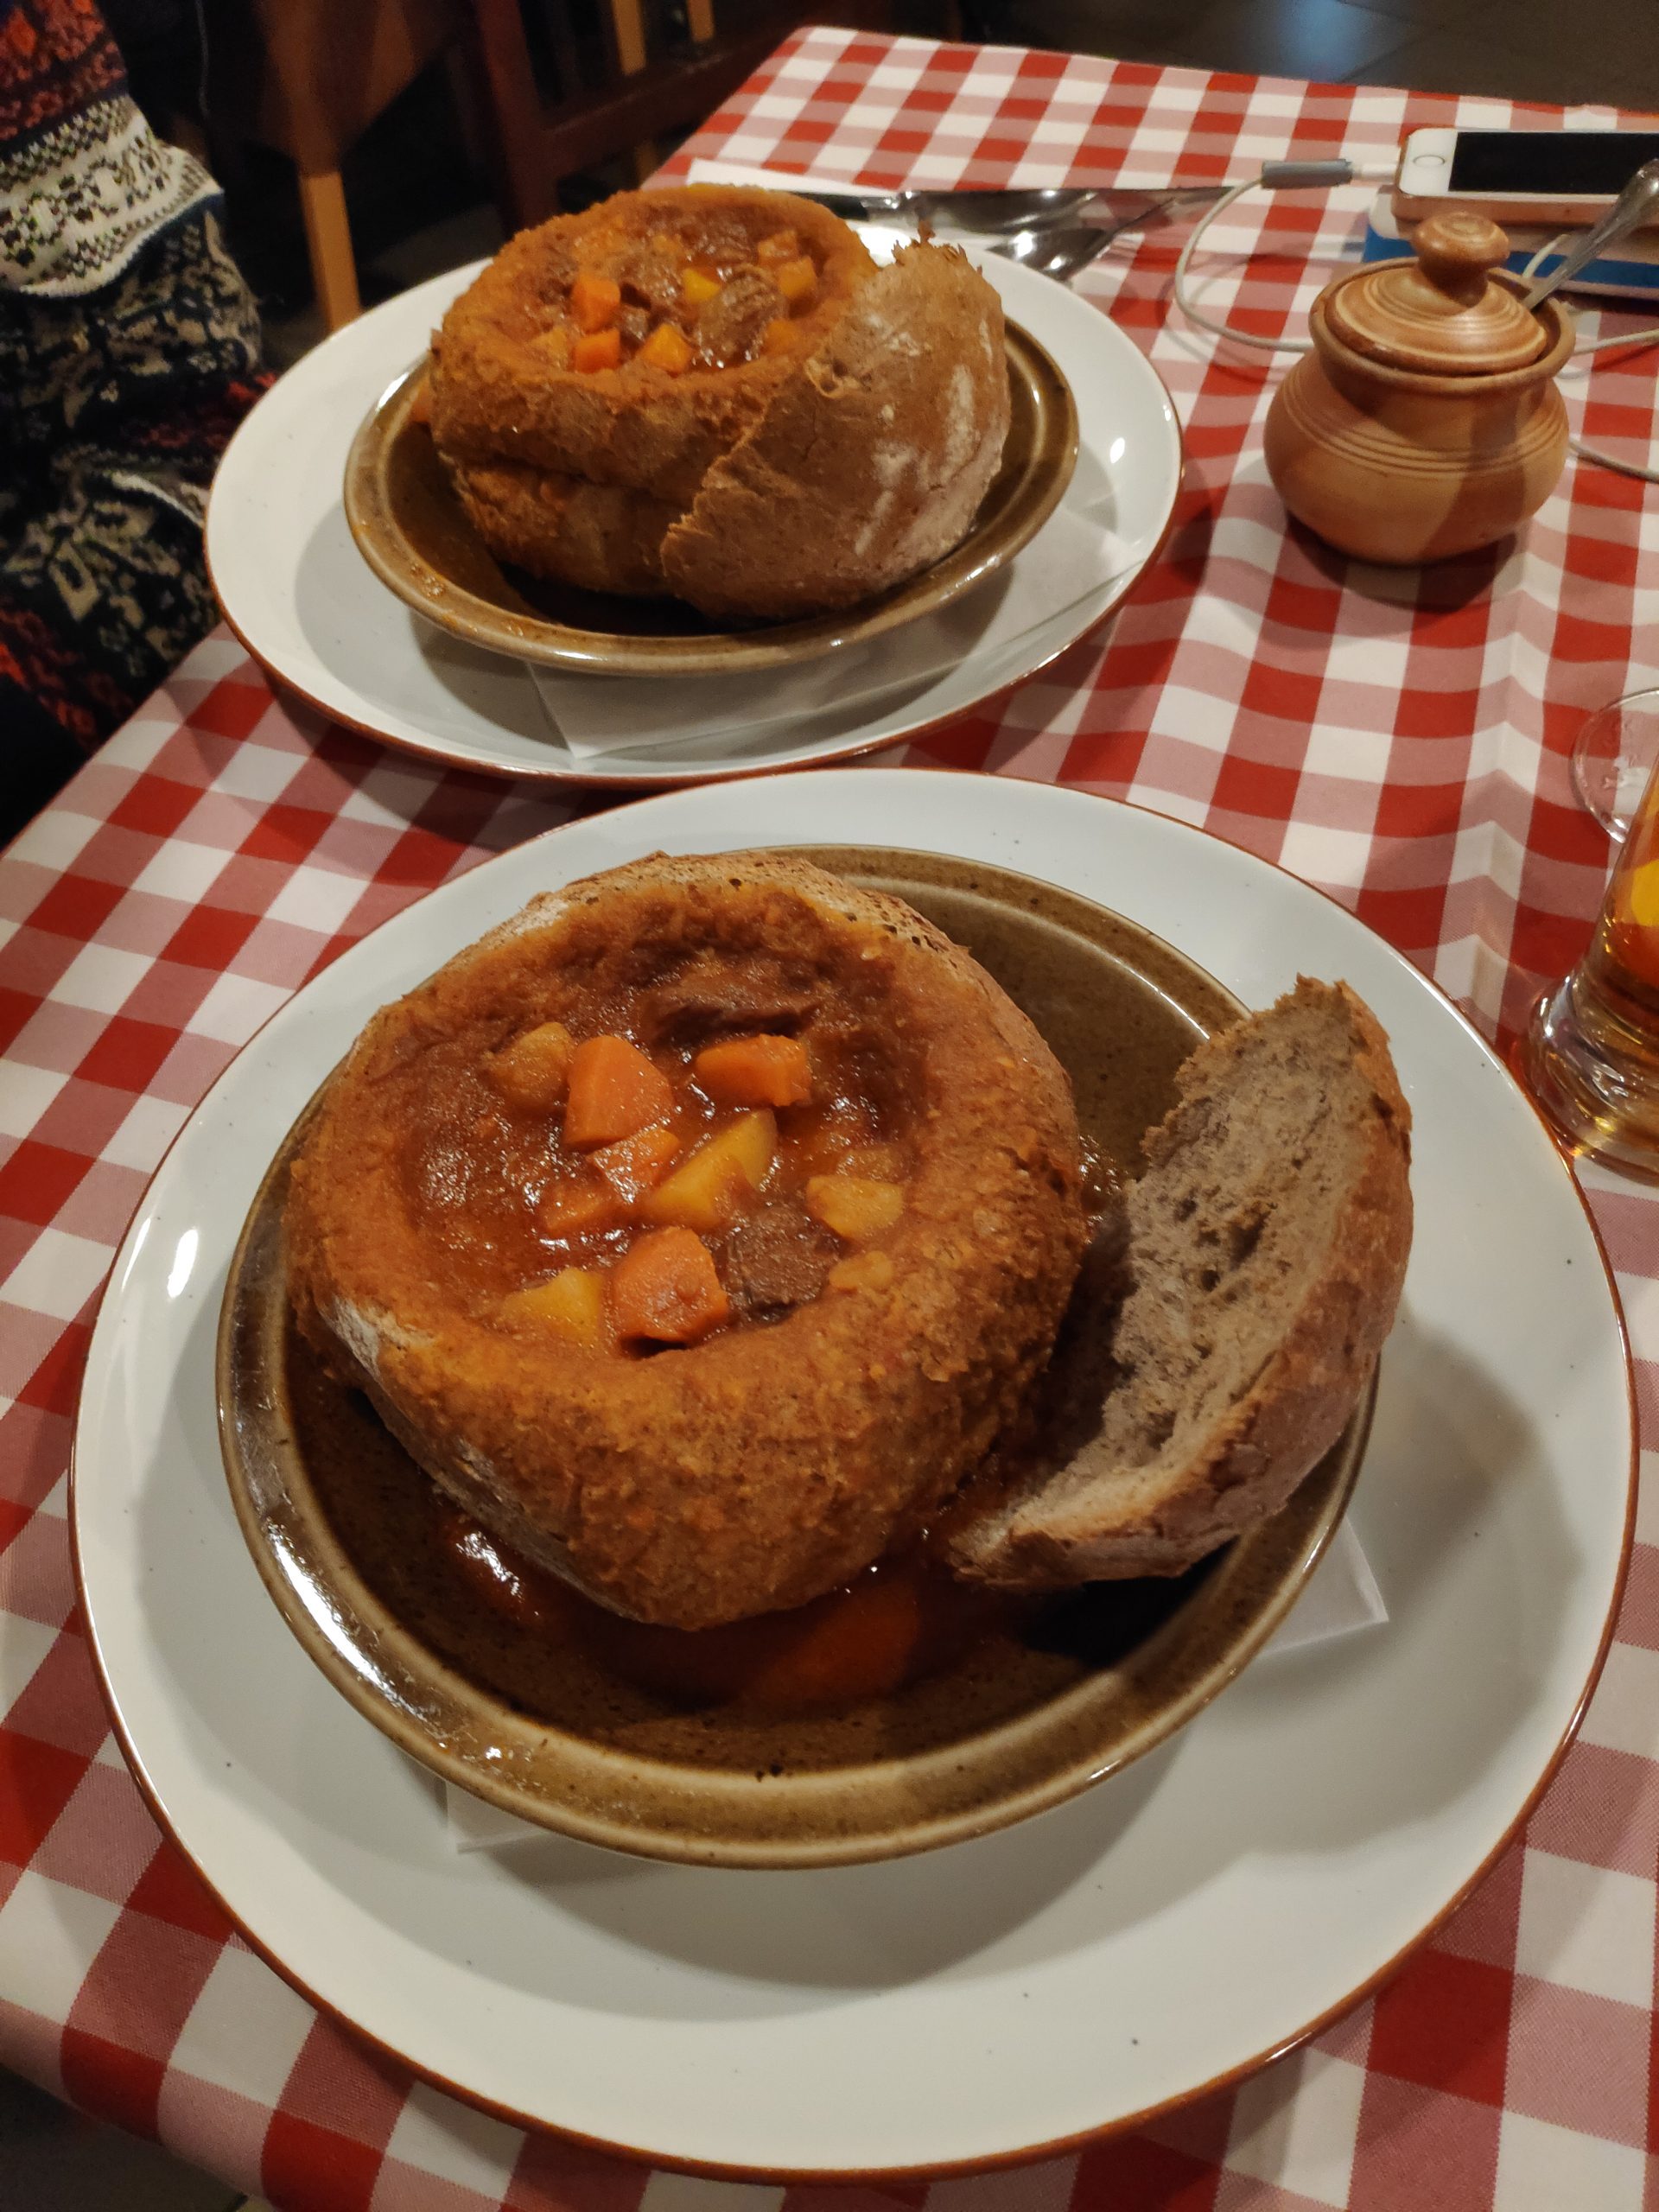 Goulash in a different restaurant, this time served in a cup made from bread, that you eat together with the soup. I actually had something similar in Slovenia, but it was with a vegetable soup.